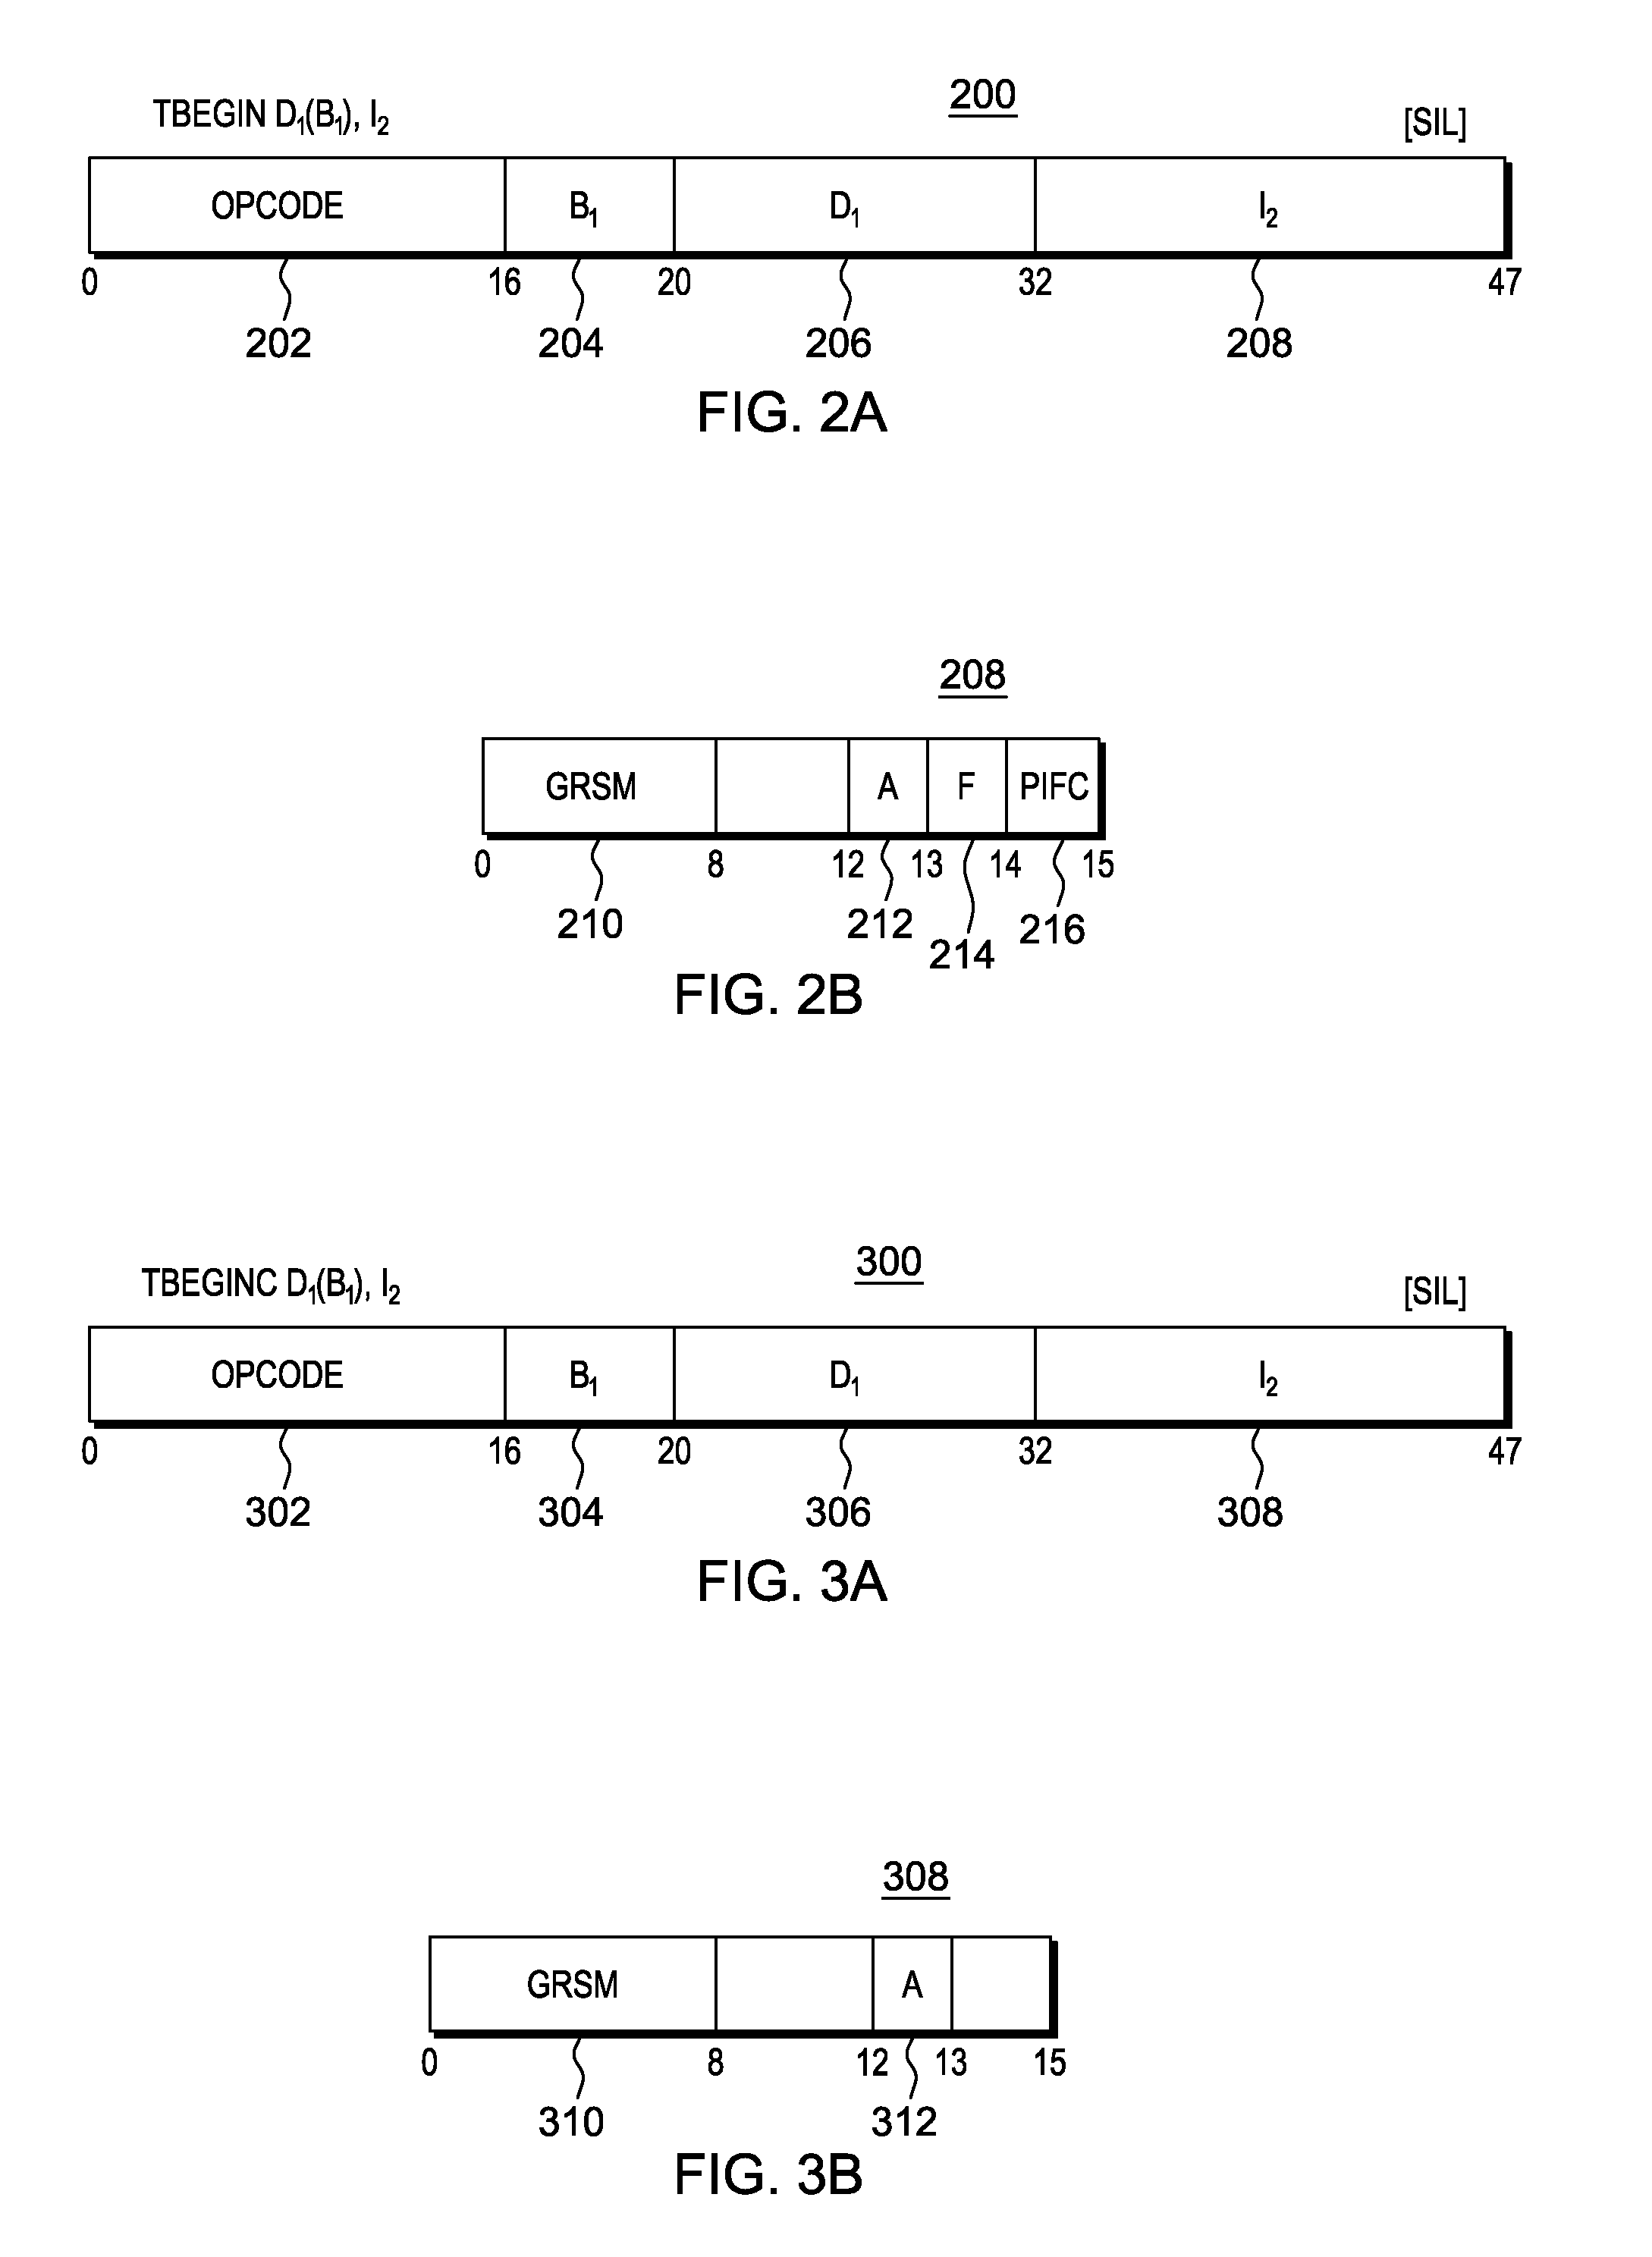 Restricting processing within a processor to facilitate transaction completion